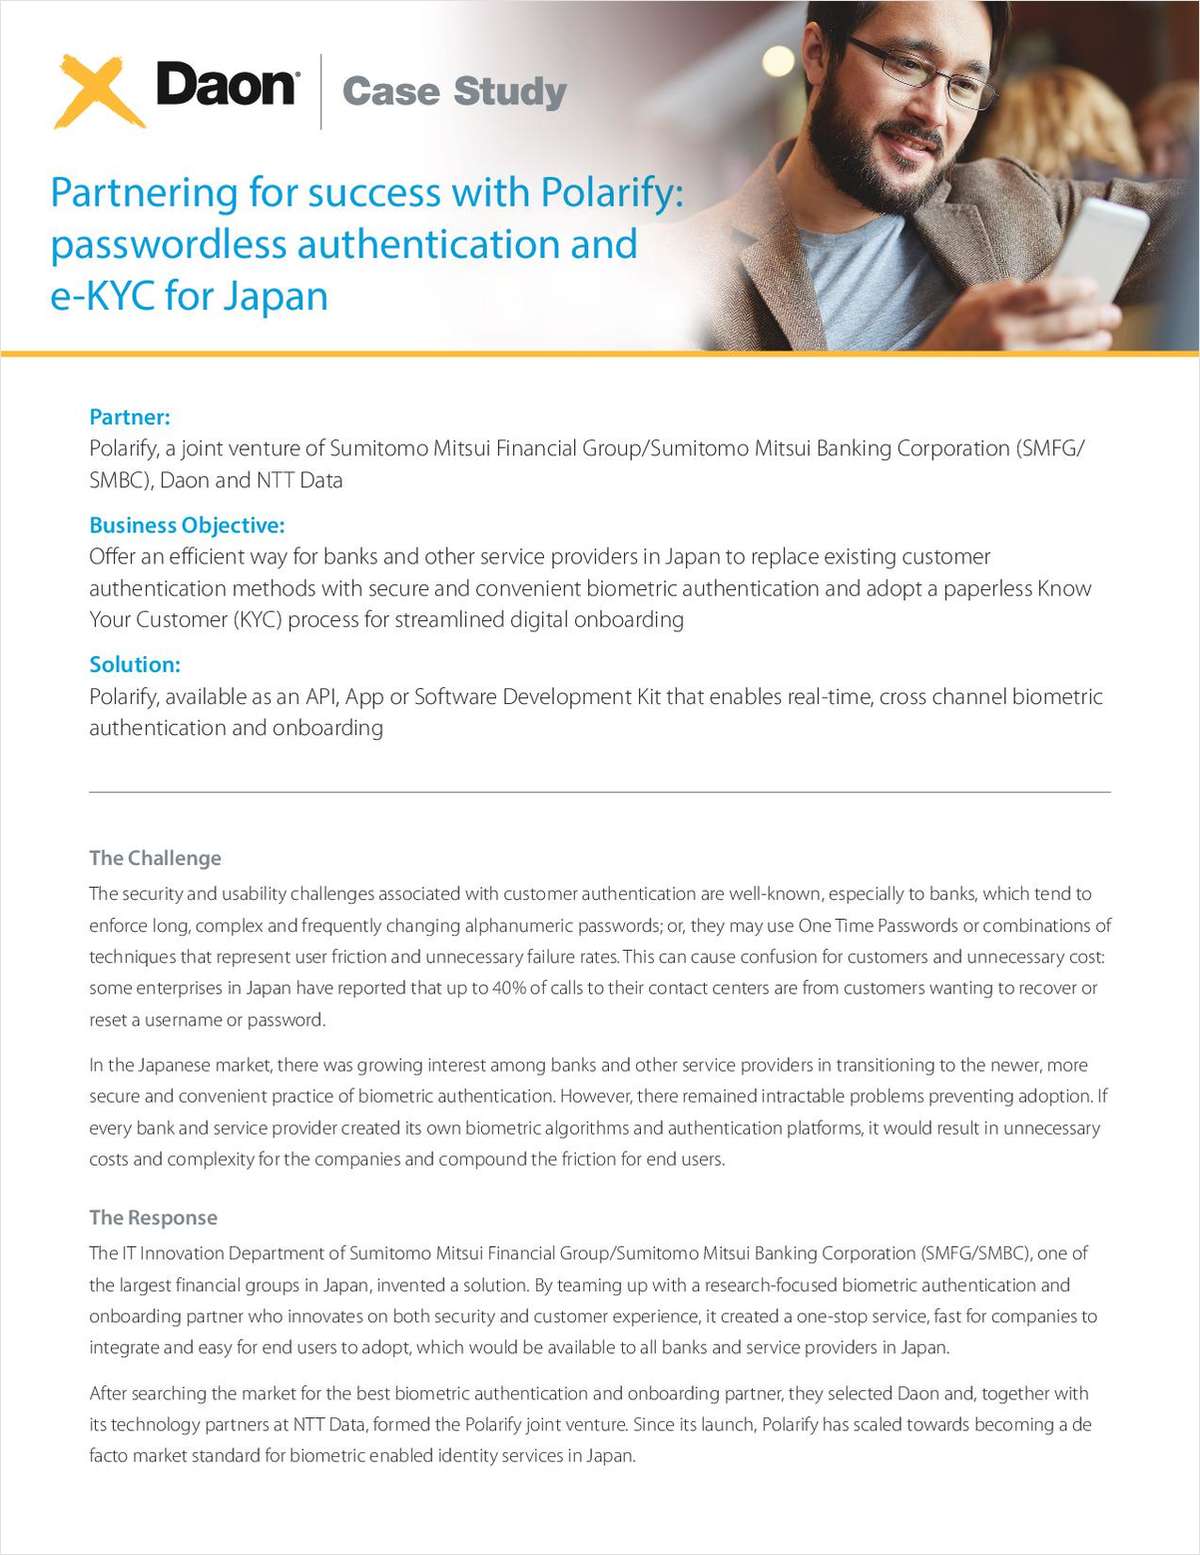 How Sumitomo Mitsui, NTT, and Daon Partner to Bring Passwordless Authentication and e-KYC to Japan